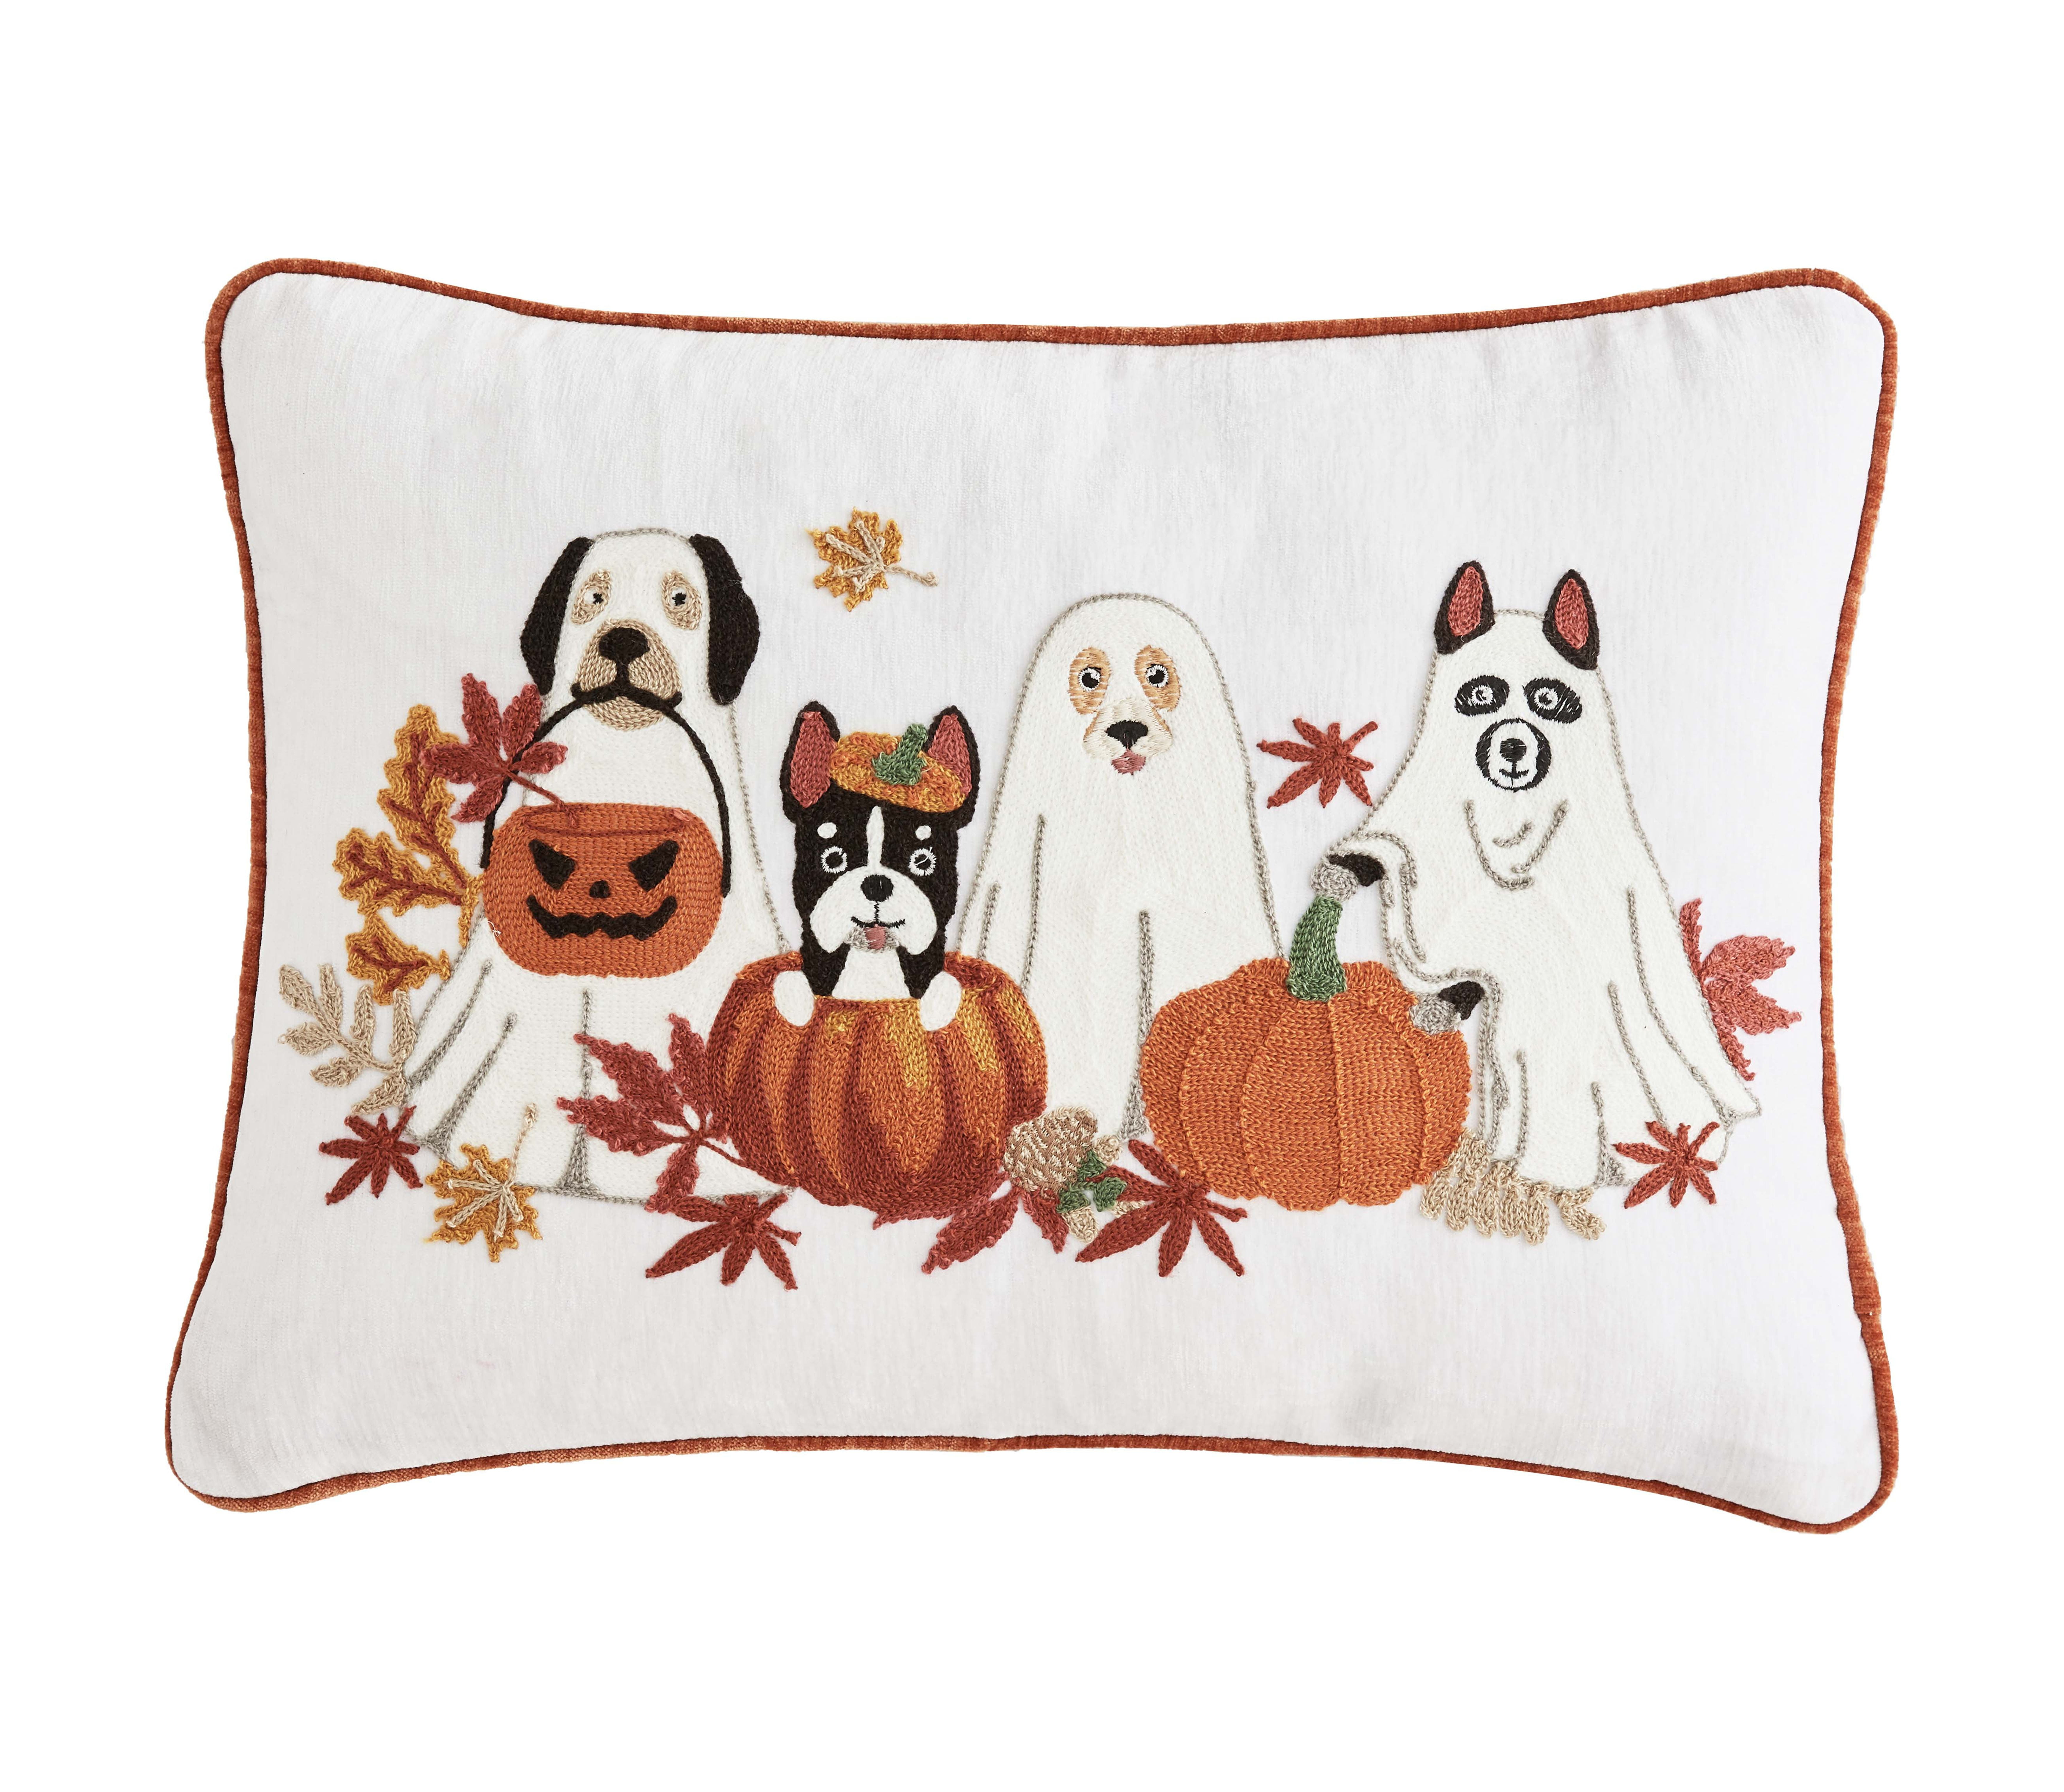 Welcome Haunted House Halloween Throw Pillow, 14x20